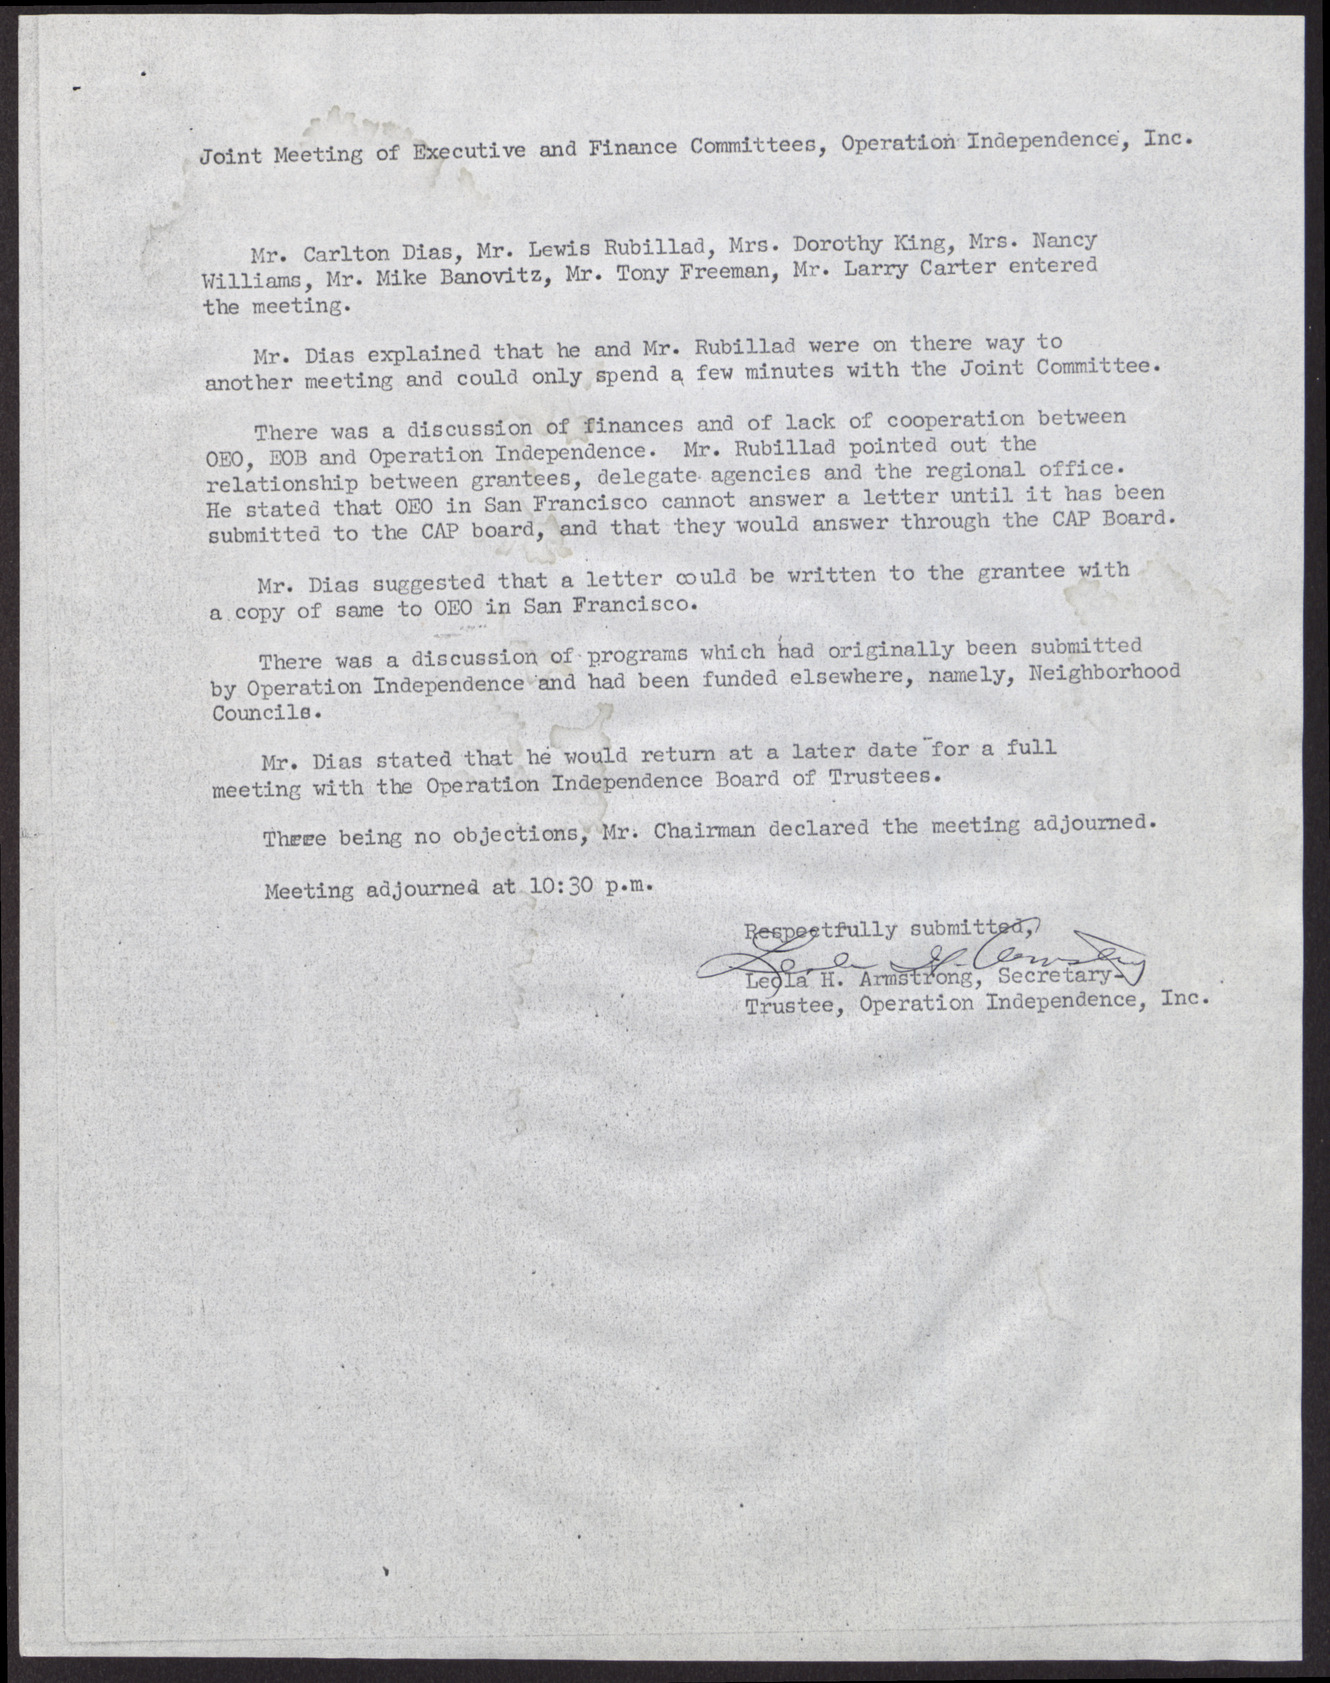 Minutes from Operation Independence Joint Meeting of Finance and Executive Committee (4 pages), December 6, 1968, page 2